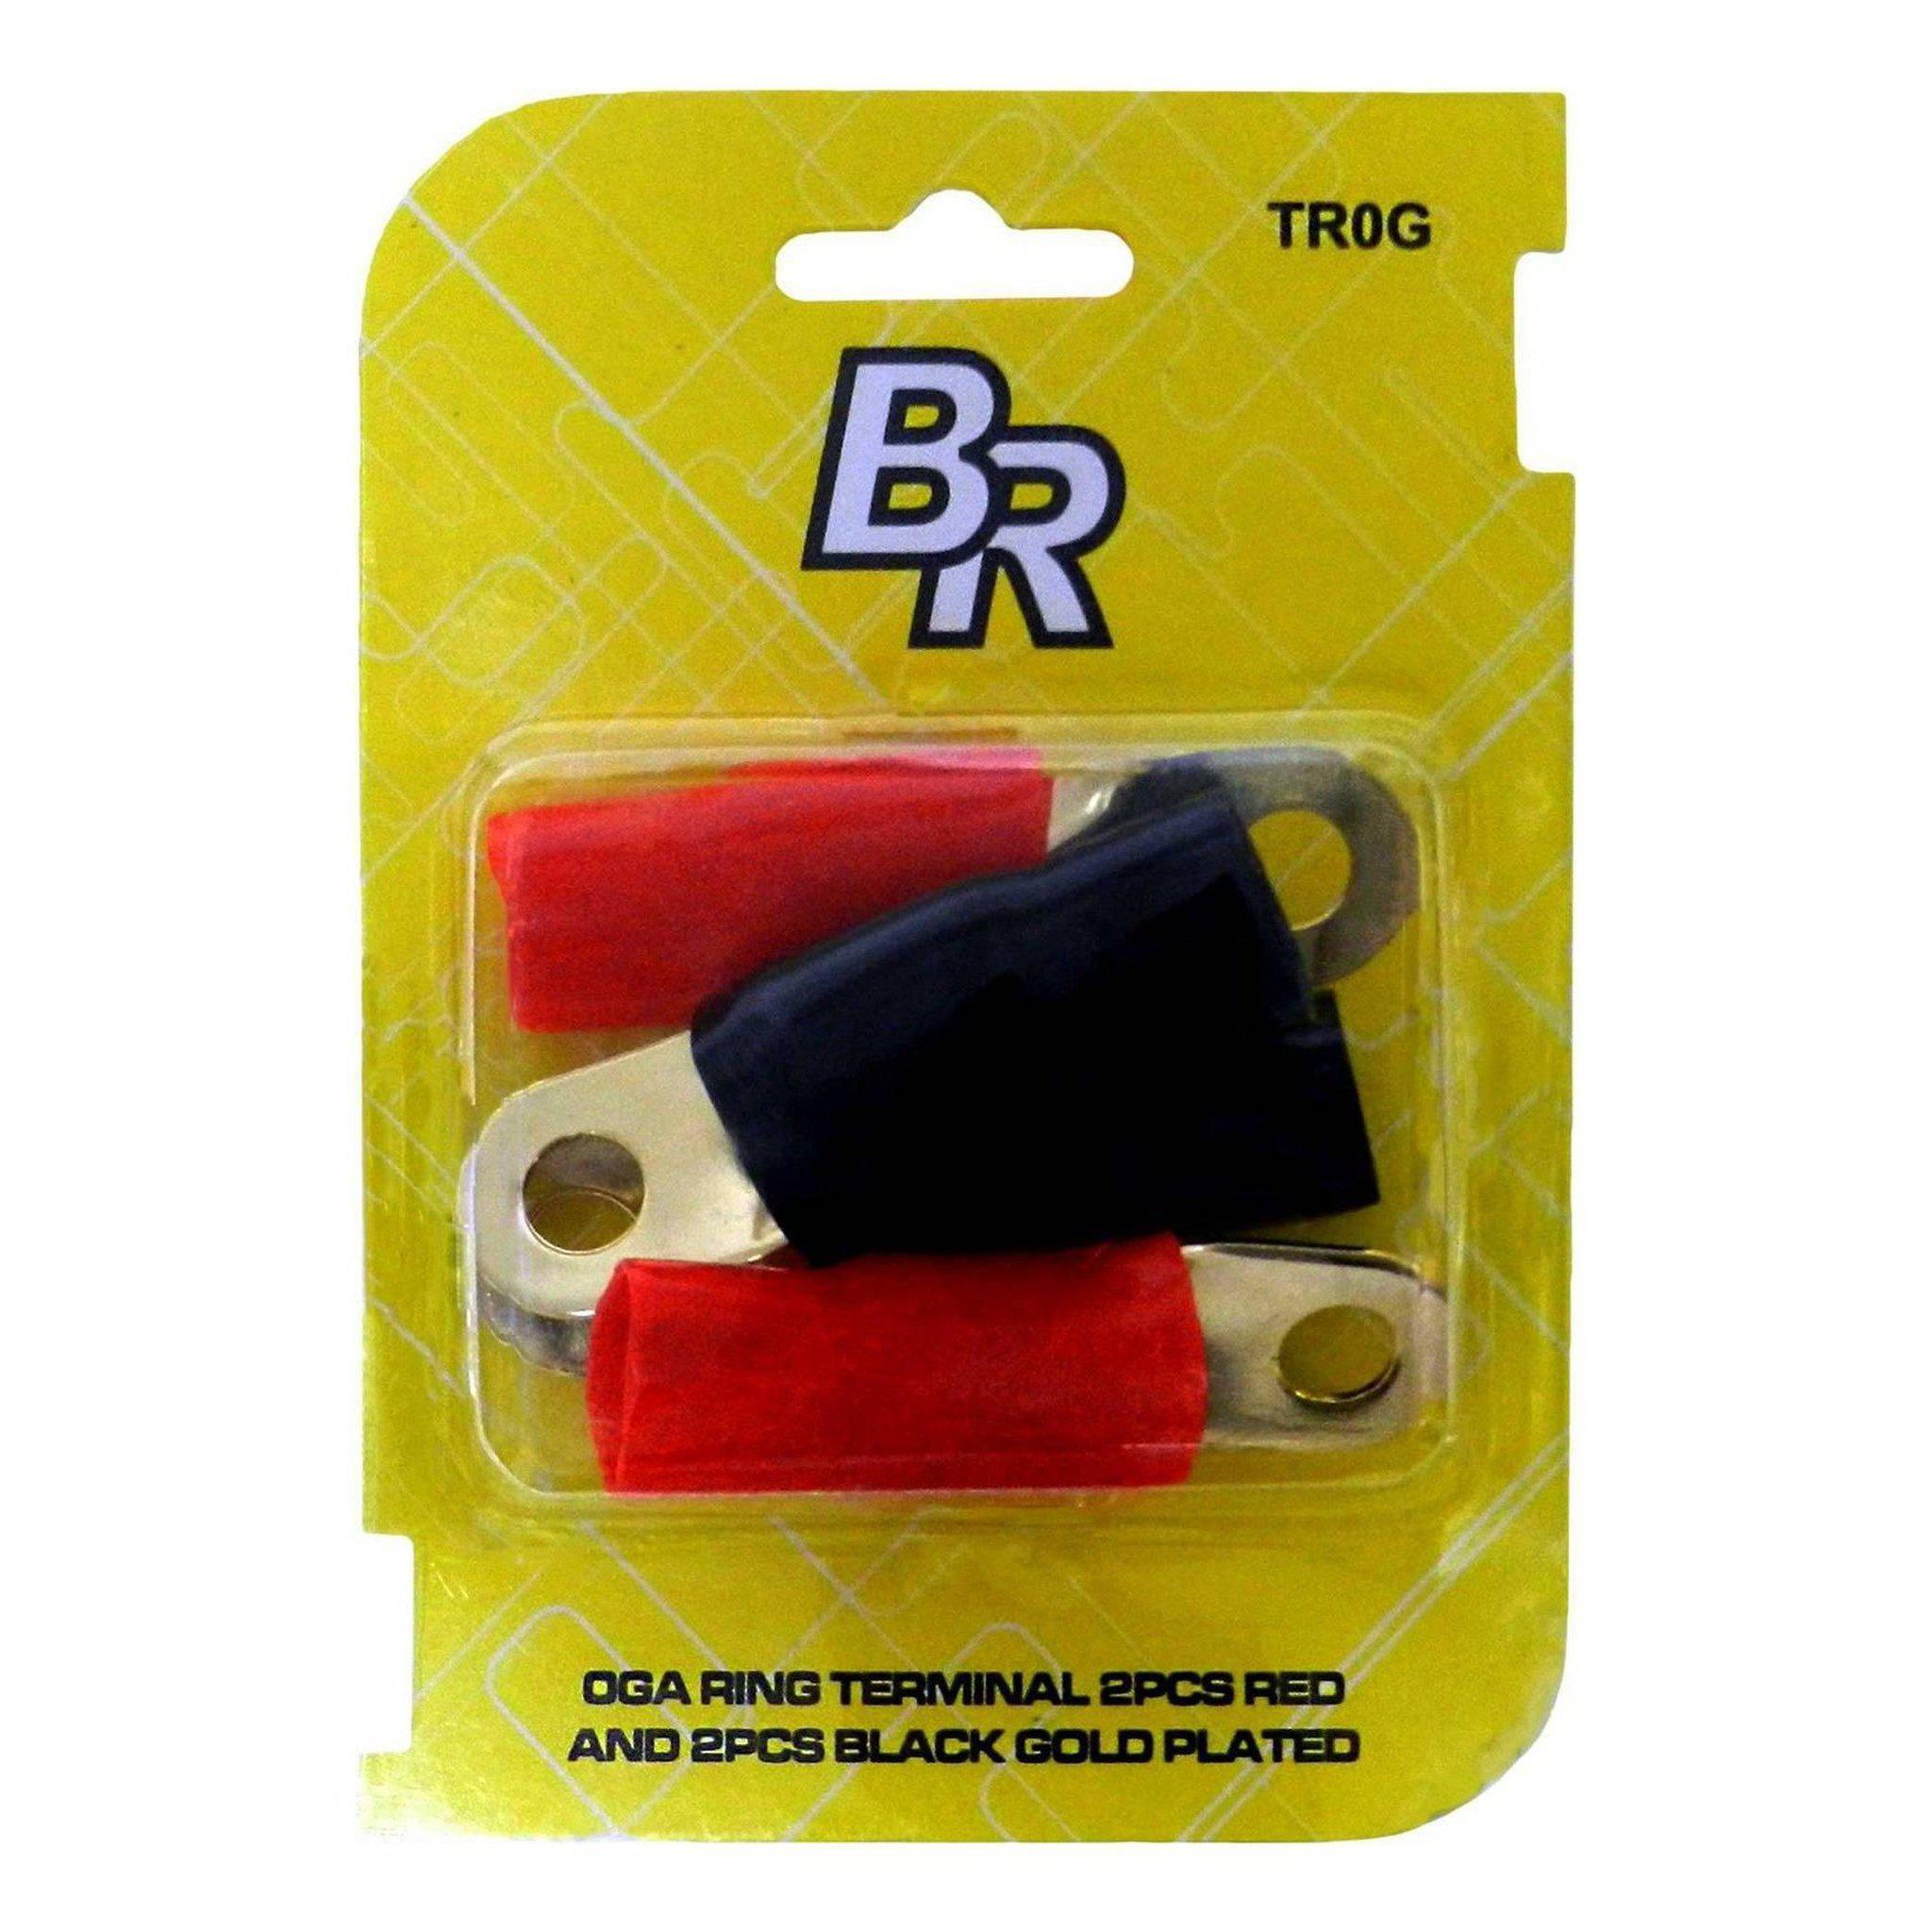 TR0G Black/Red Gold Plated Ring Terminal Crimp Connectors 0GA (4 pieces)-Bass Rockers-5